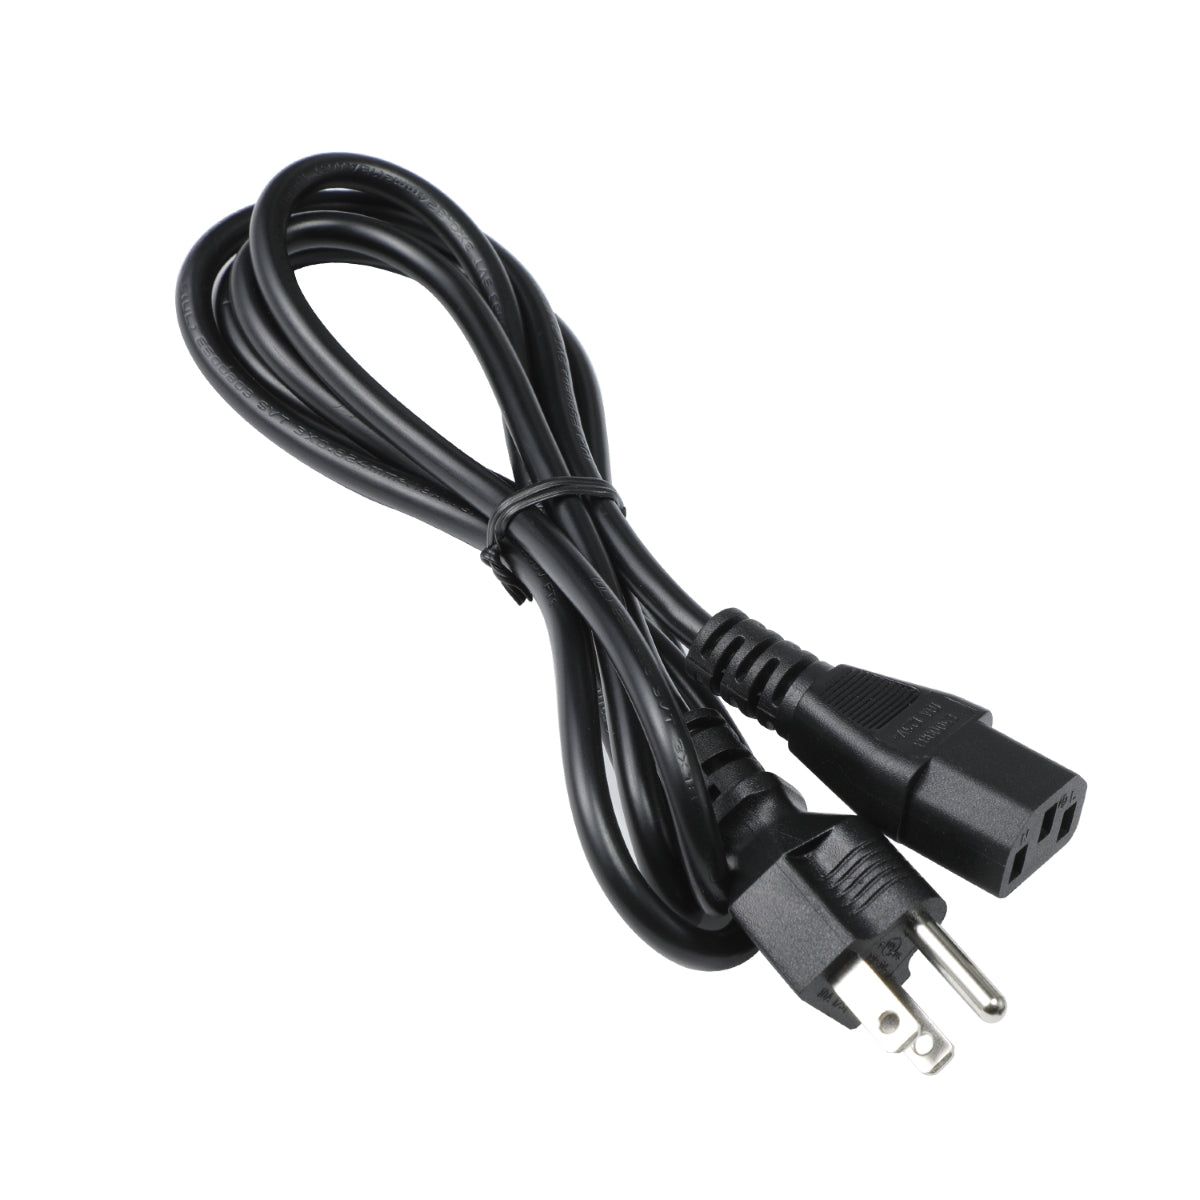 Power Cord for HP Pavilion 550-260 Computer.